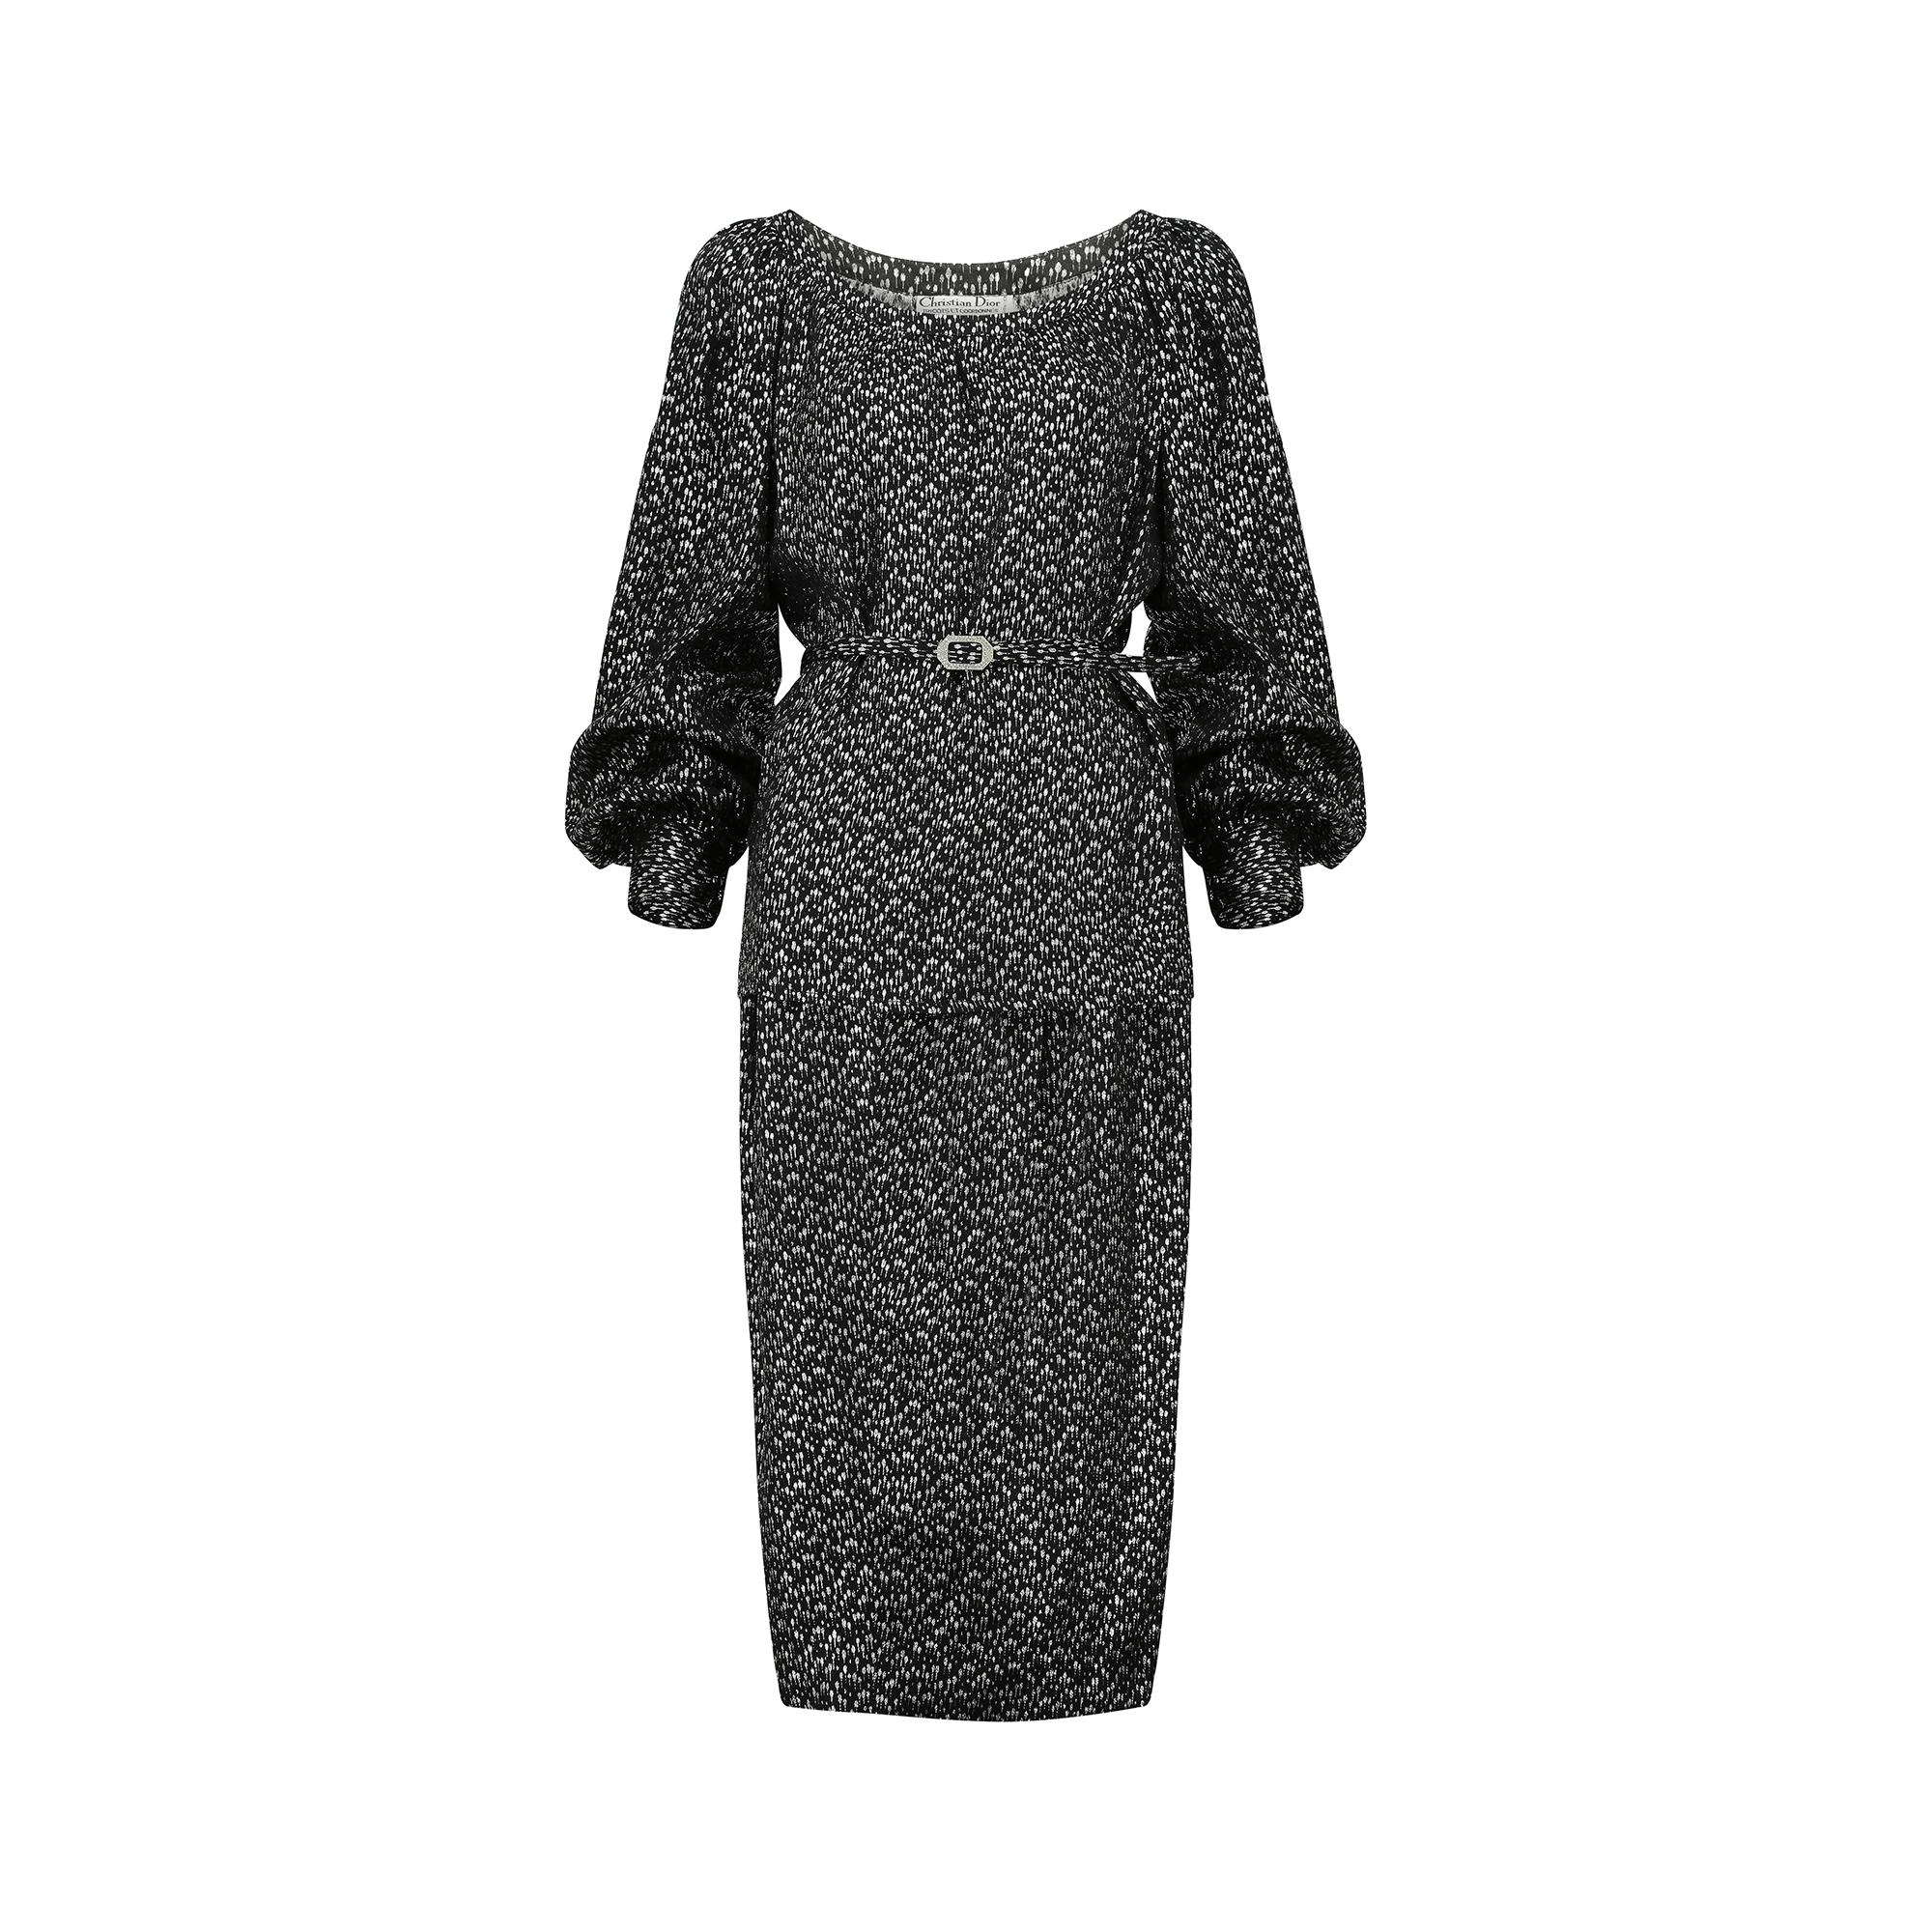 This Christian Dior set is from the late 1970s to early 1980s and made from a metallic black and silver lightweight silk lame.  The design of the weave has an almost celestial look - oval spots with the larger of the two sizes having a small tail,